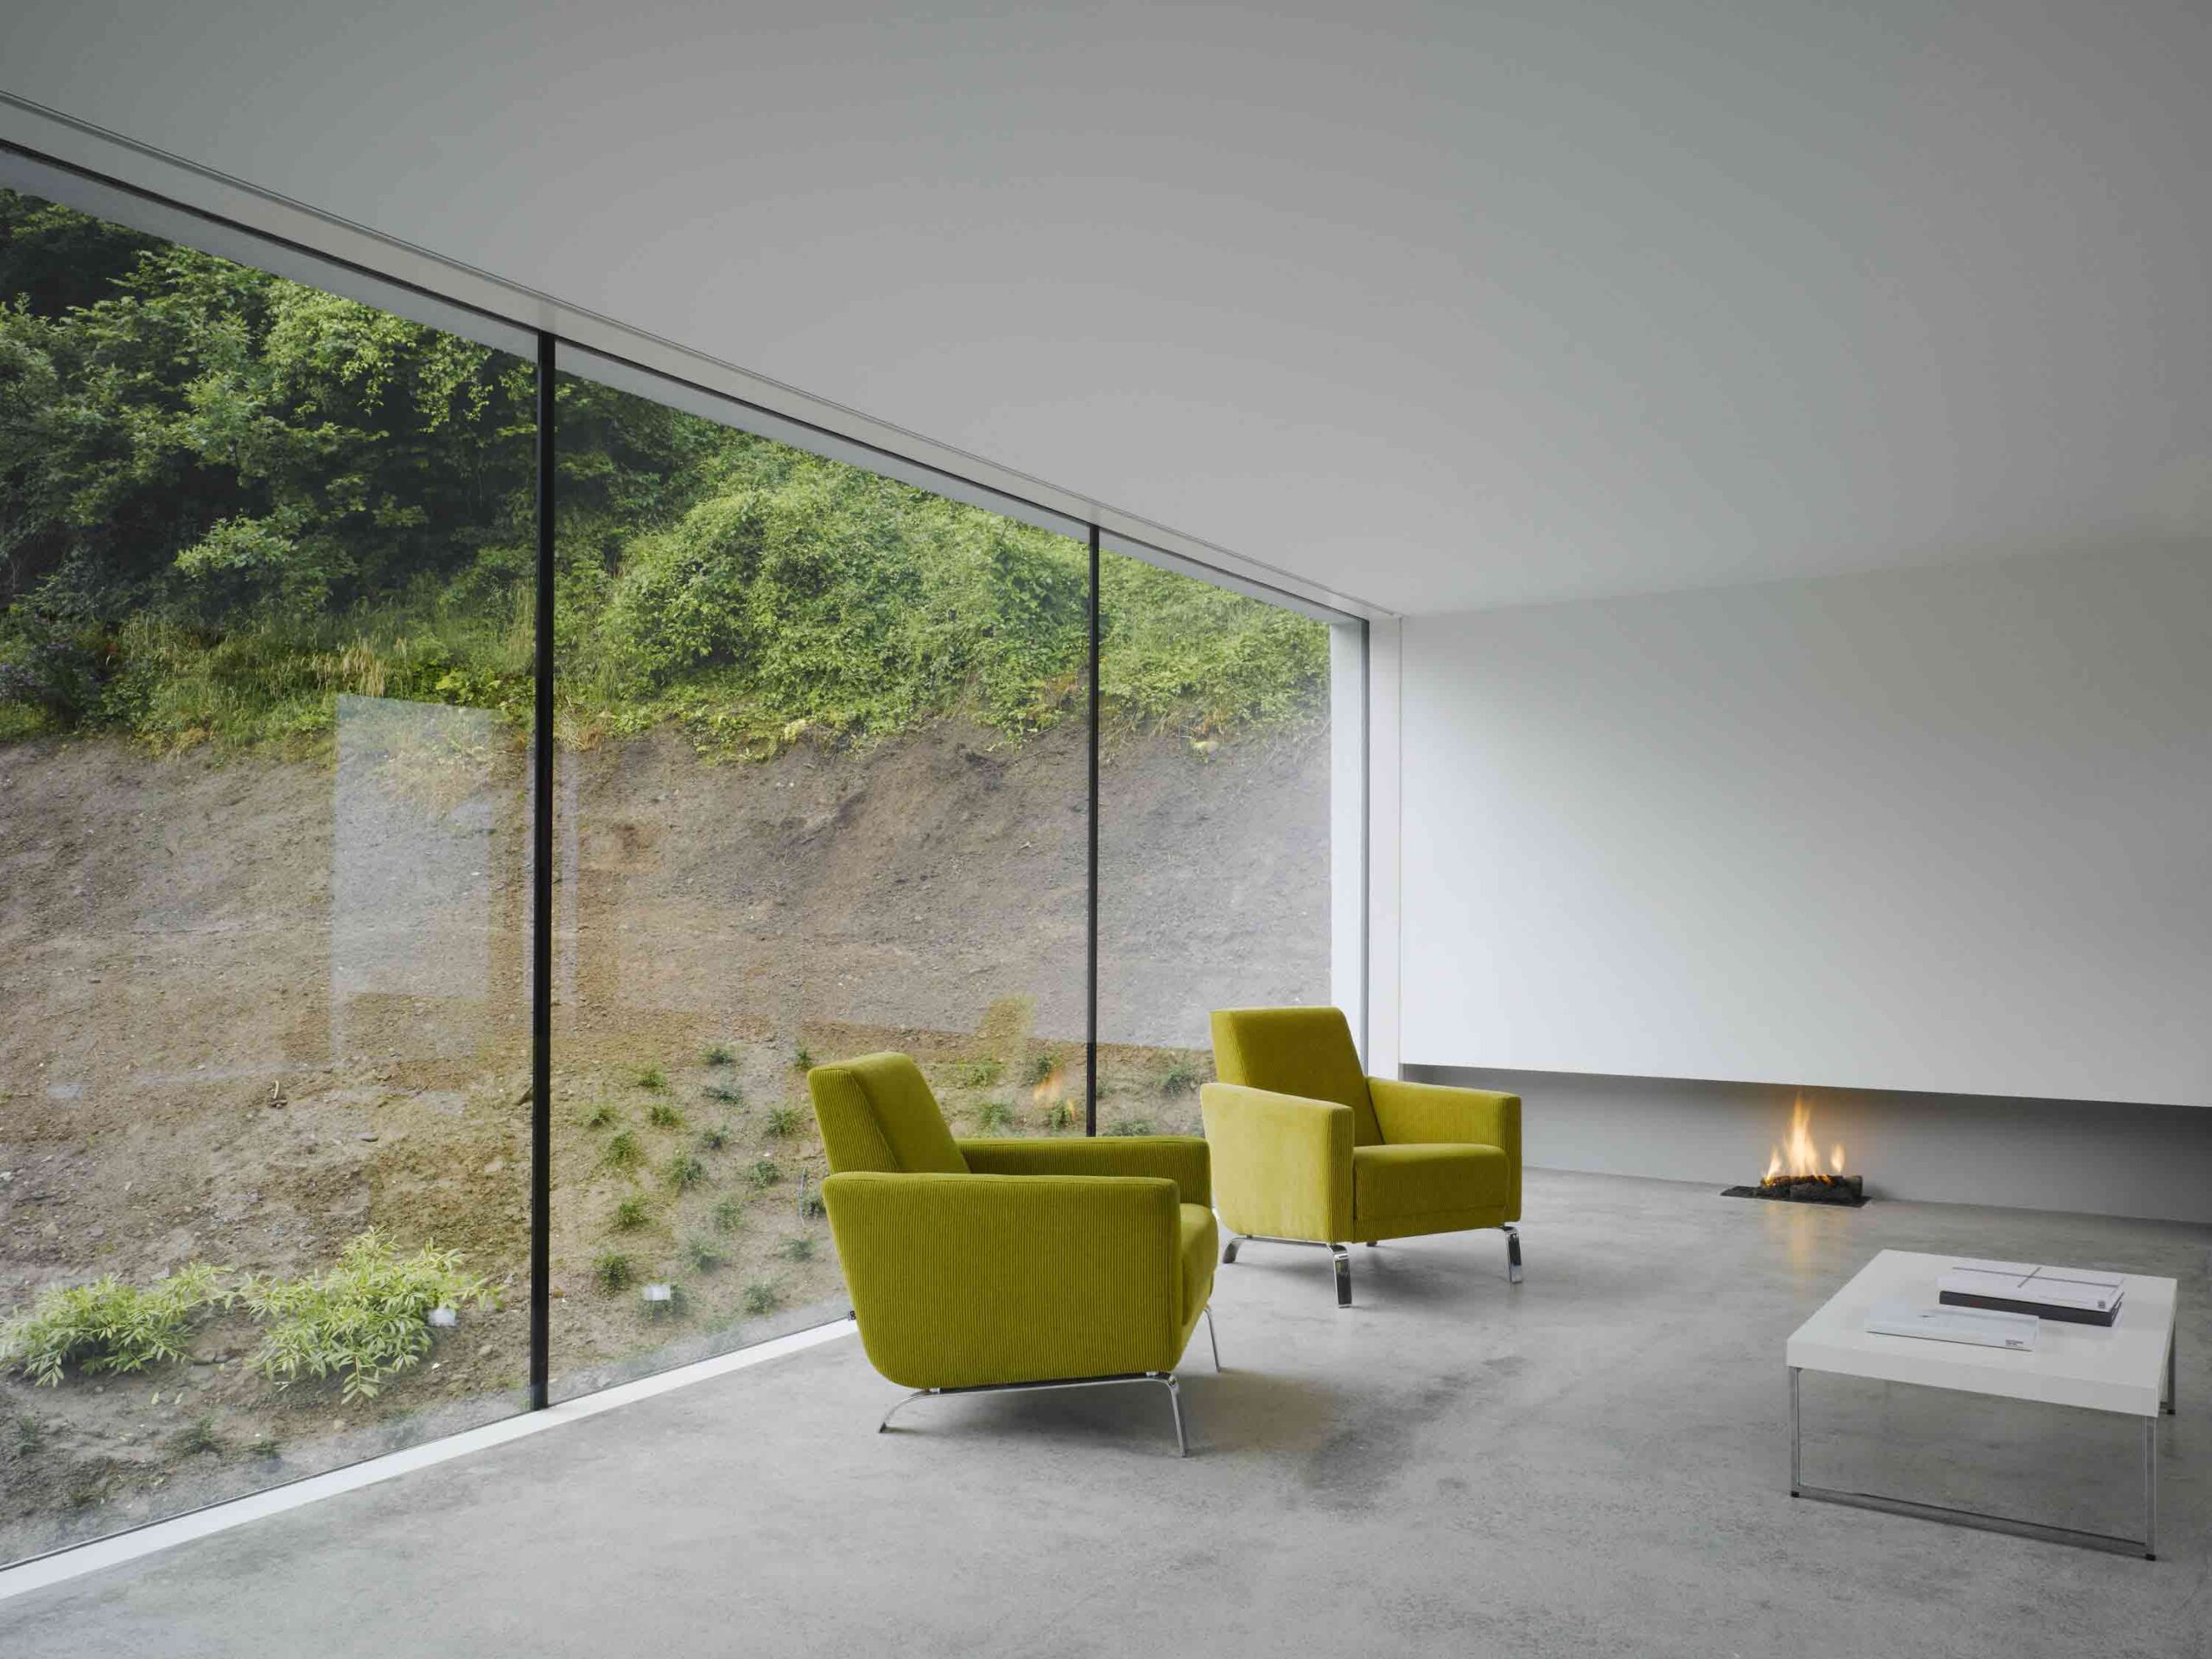 Dwelling at Maytree by ODOS